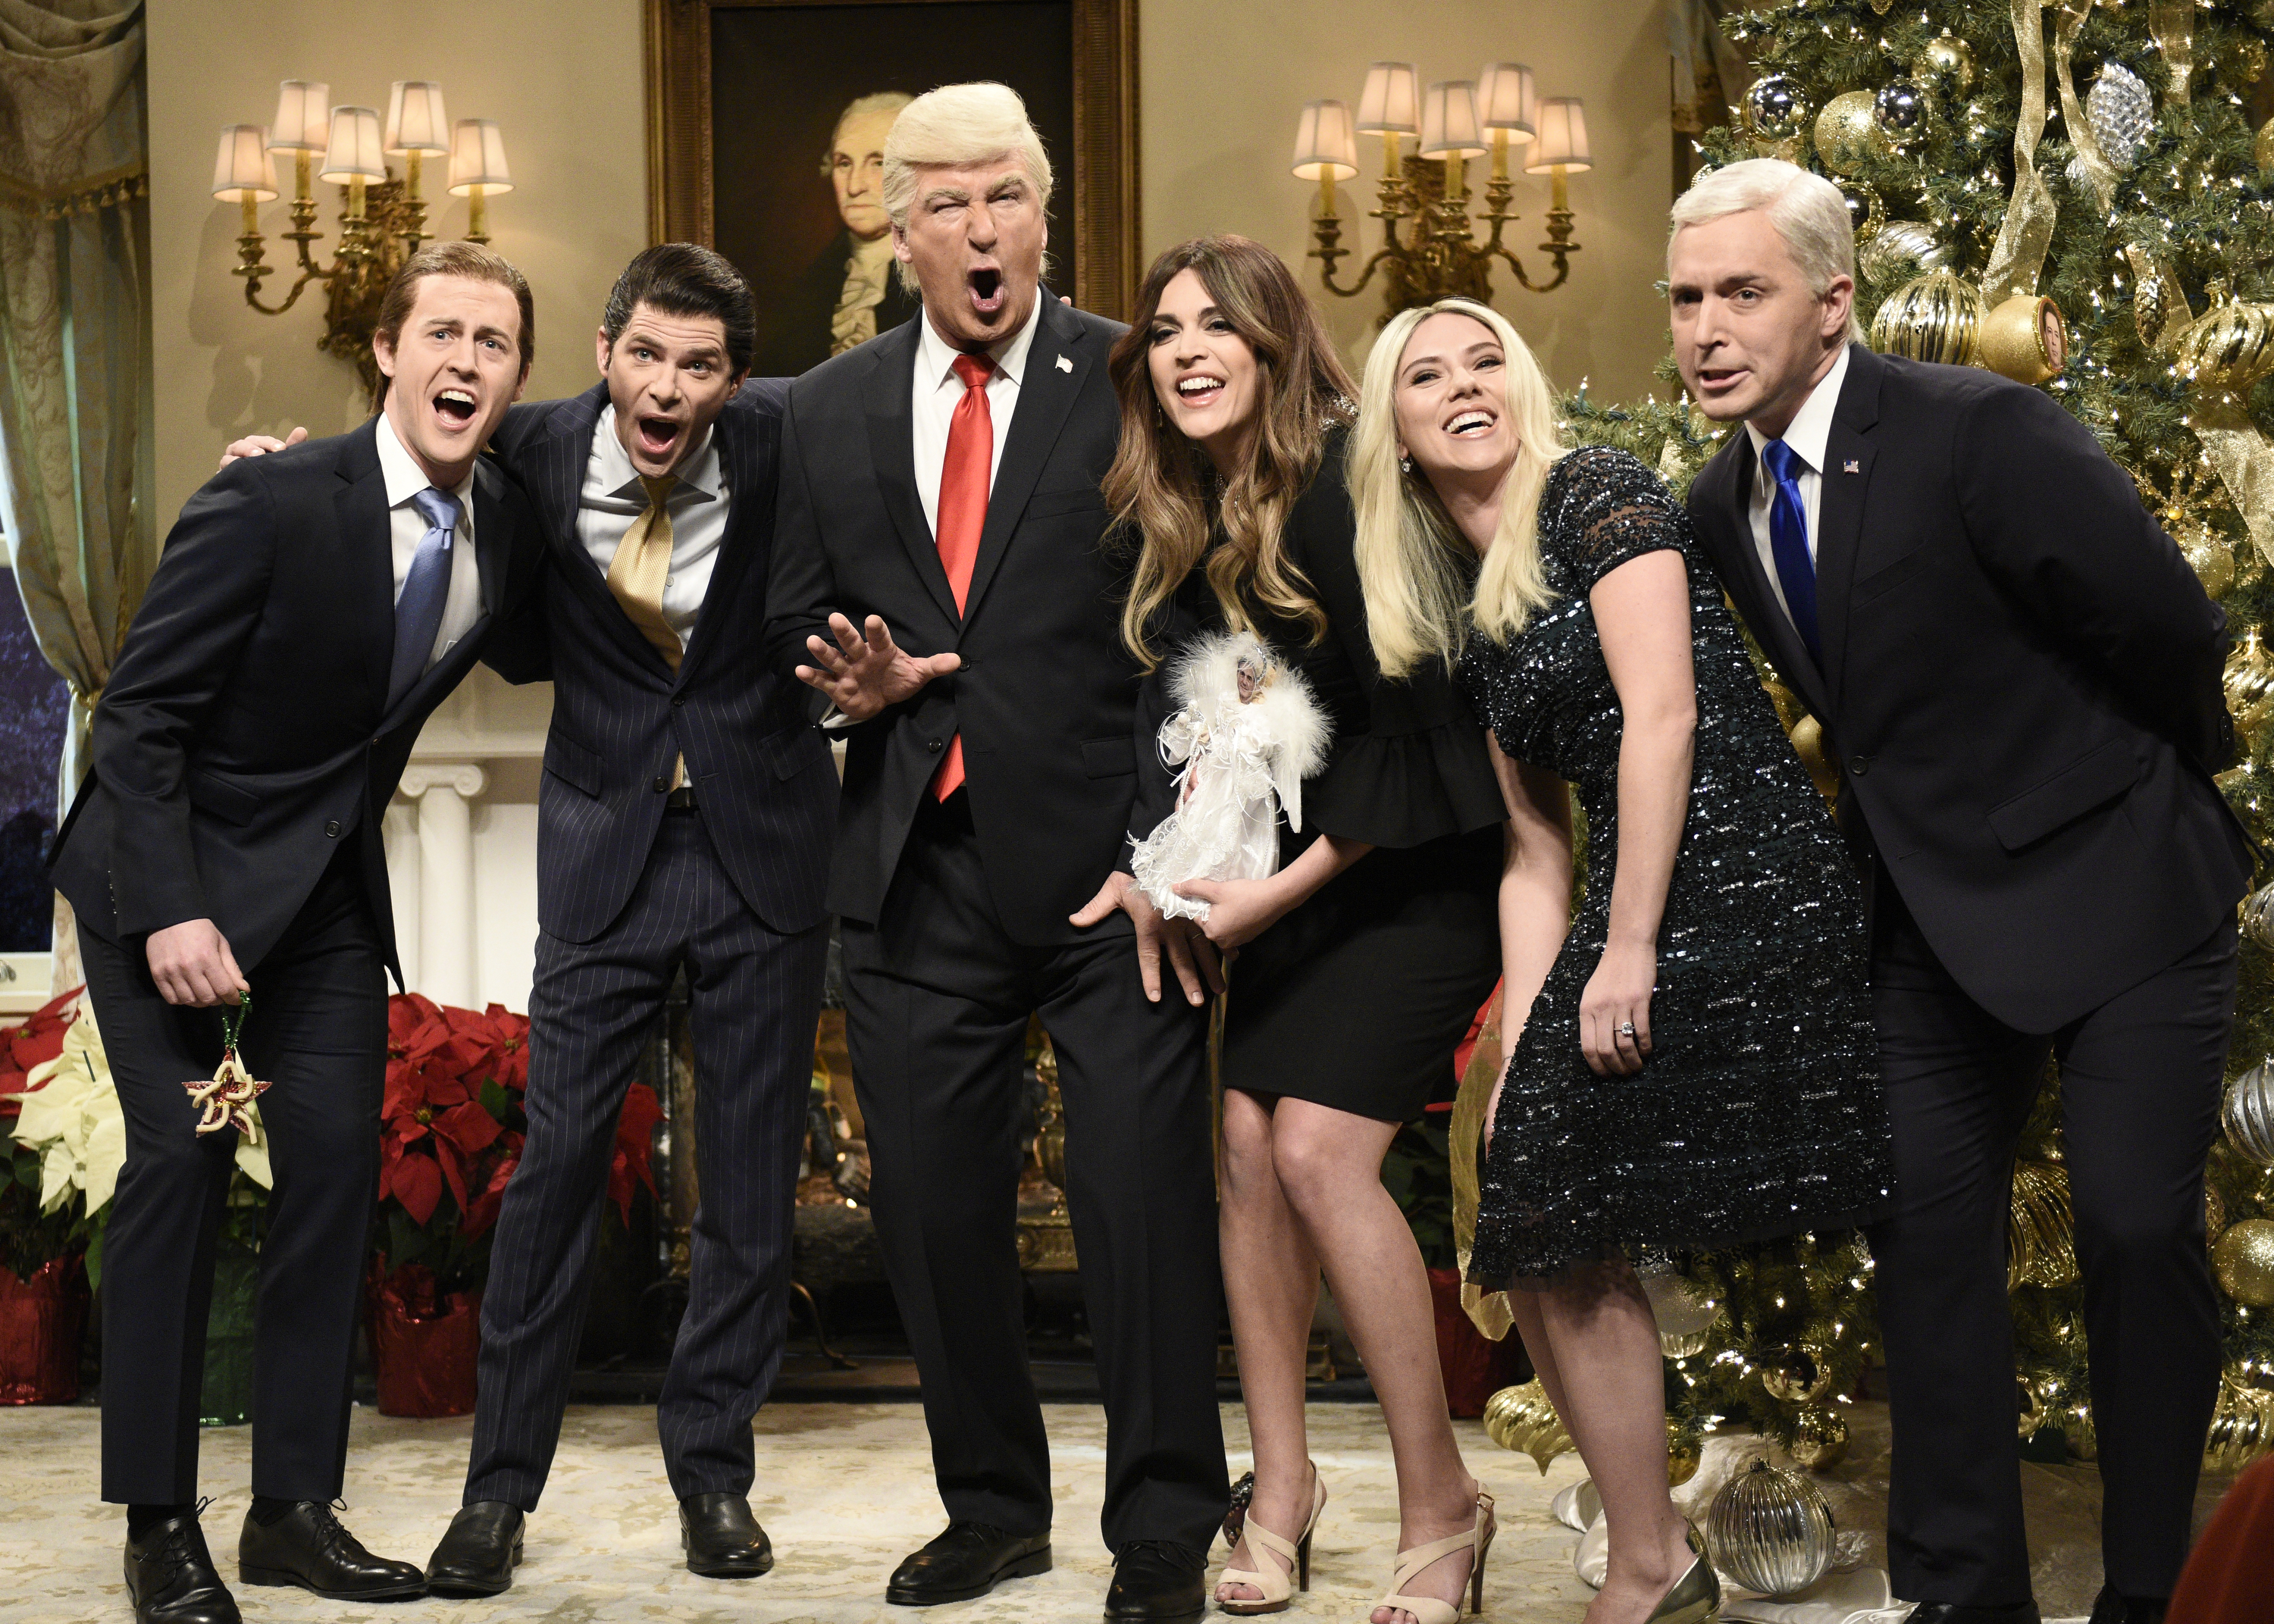 Alex Moffat as Eric Trump, Mikey Day as Donald Trump Jr., Alec Baldwin as President Donald Trump, Cecily Strong as First Lady Melania Trump, Scarlett Johansson as Ivanka Trump, and Beck Bennett as Vice President Mike Pence during "Saturday Night Live" on Dec. 16, 2017 (Will Heath—NBCU/Getty Images)